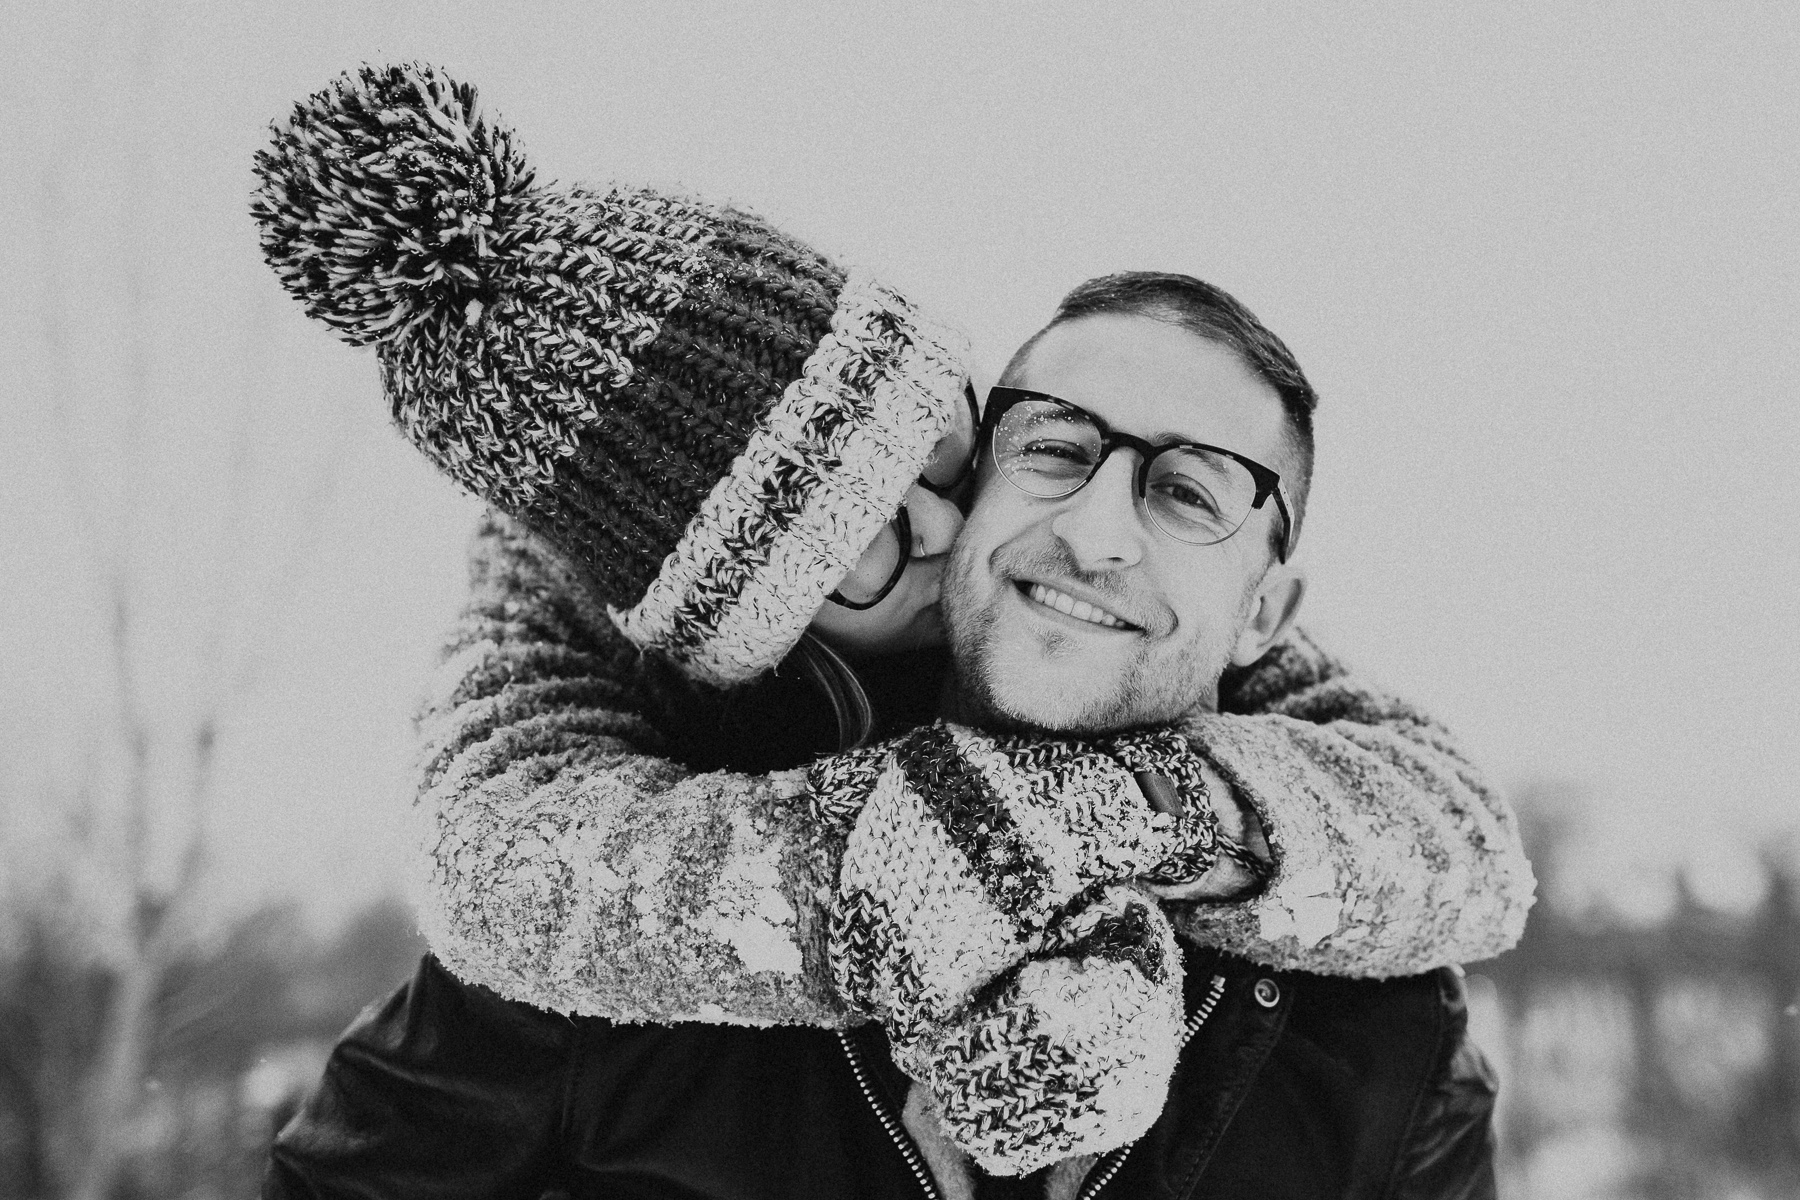 Fun-loving Couple Go For Winter Engagement Photoshoot in Toronto